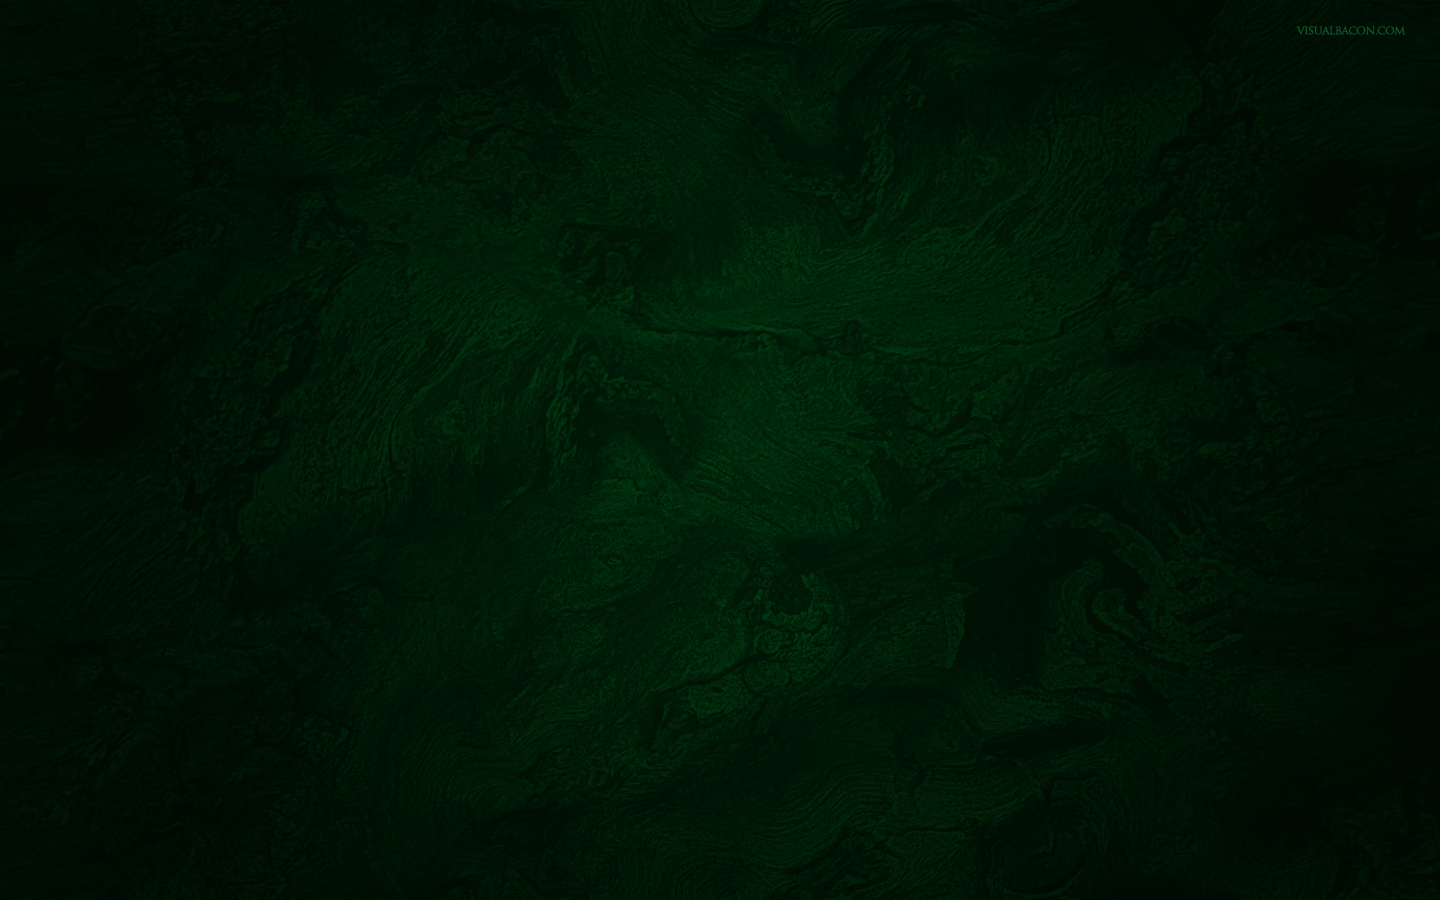 Dark Green Christmas Background Image Amp Pictures Becuo